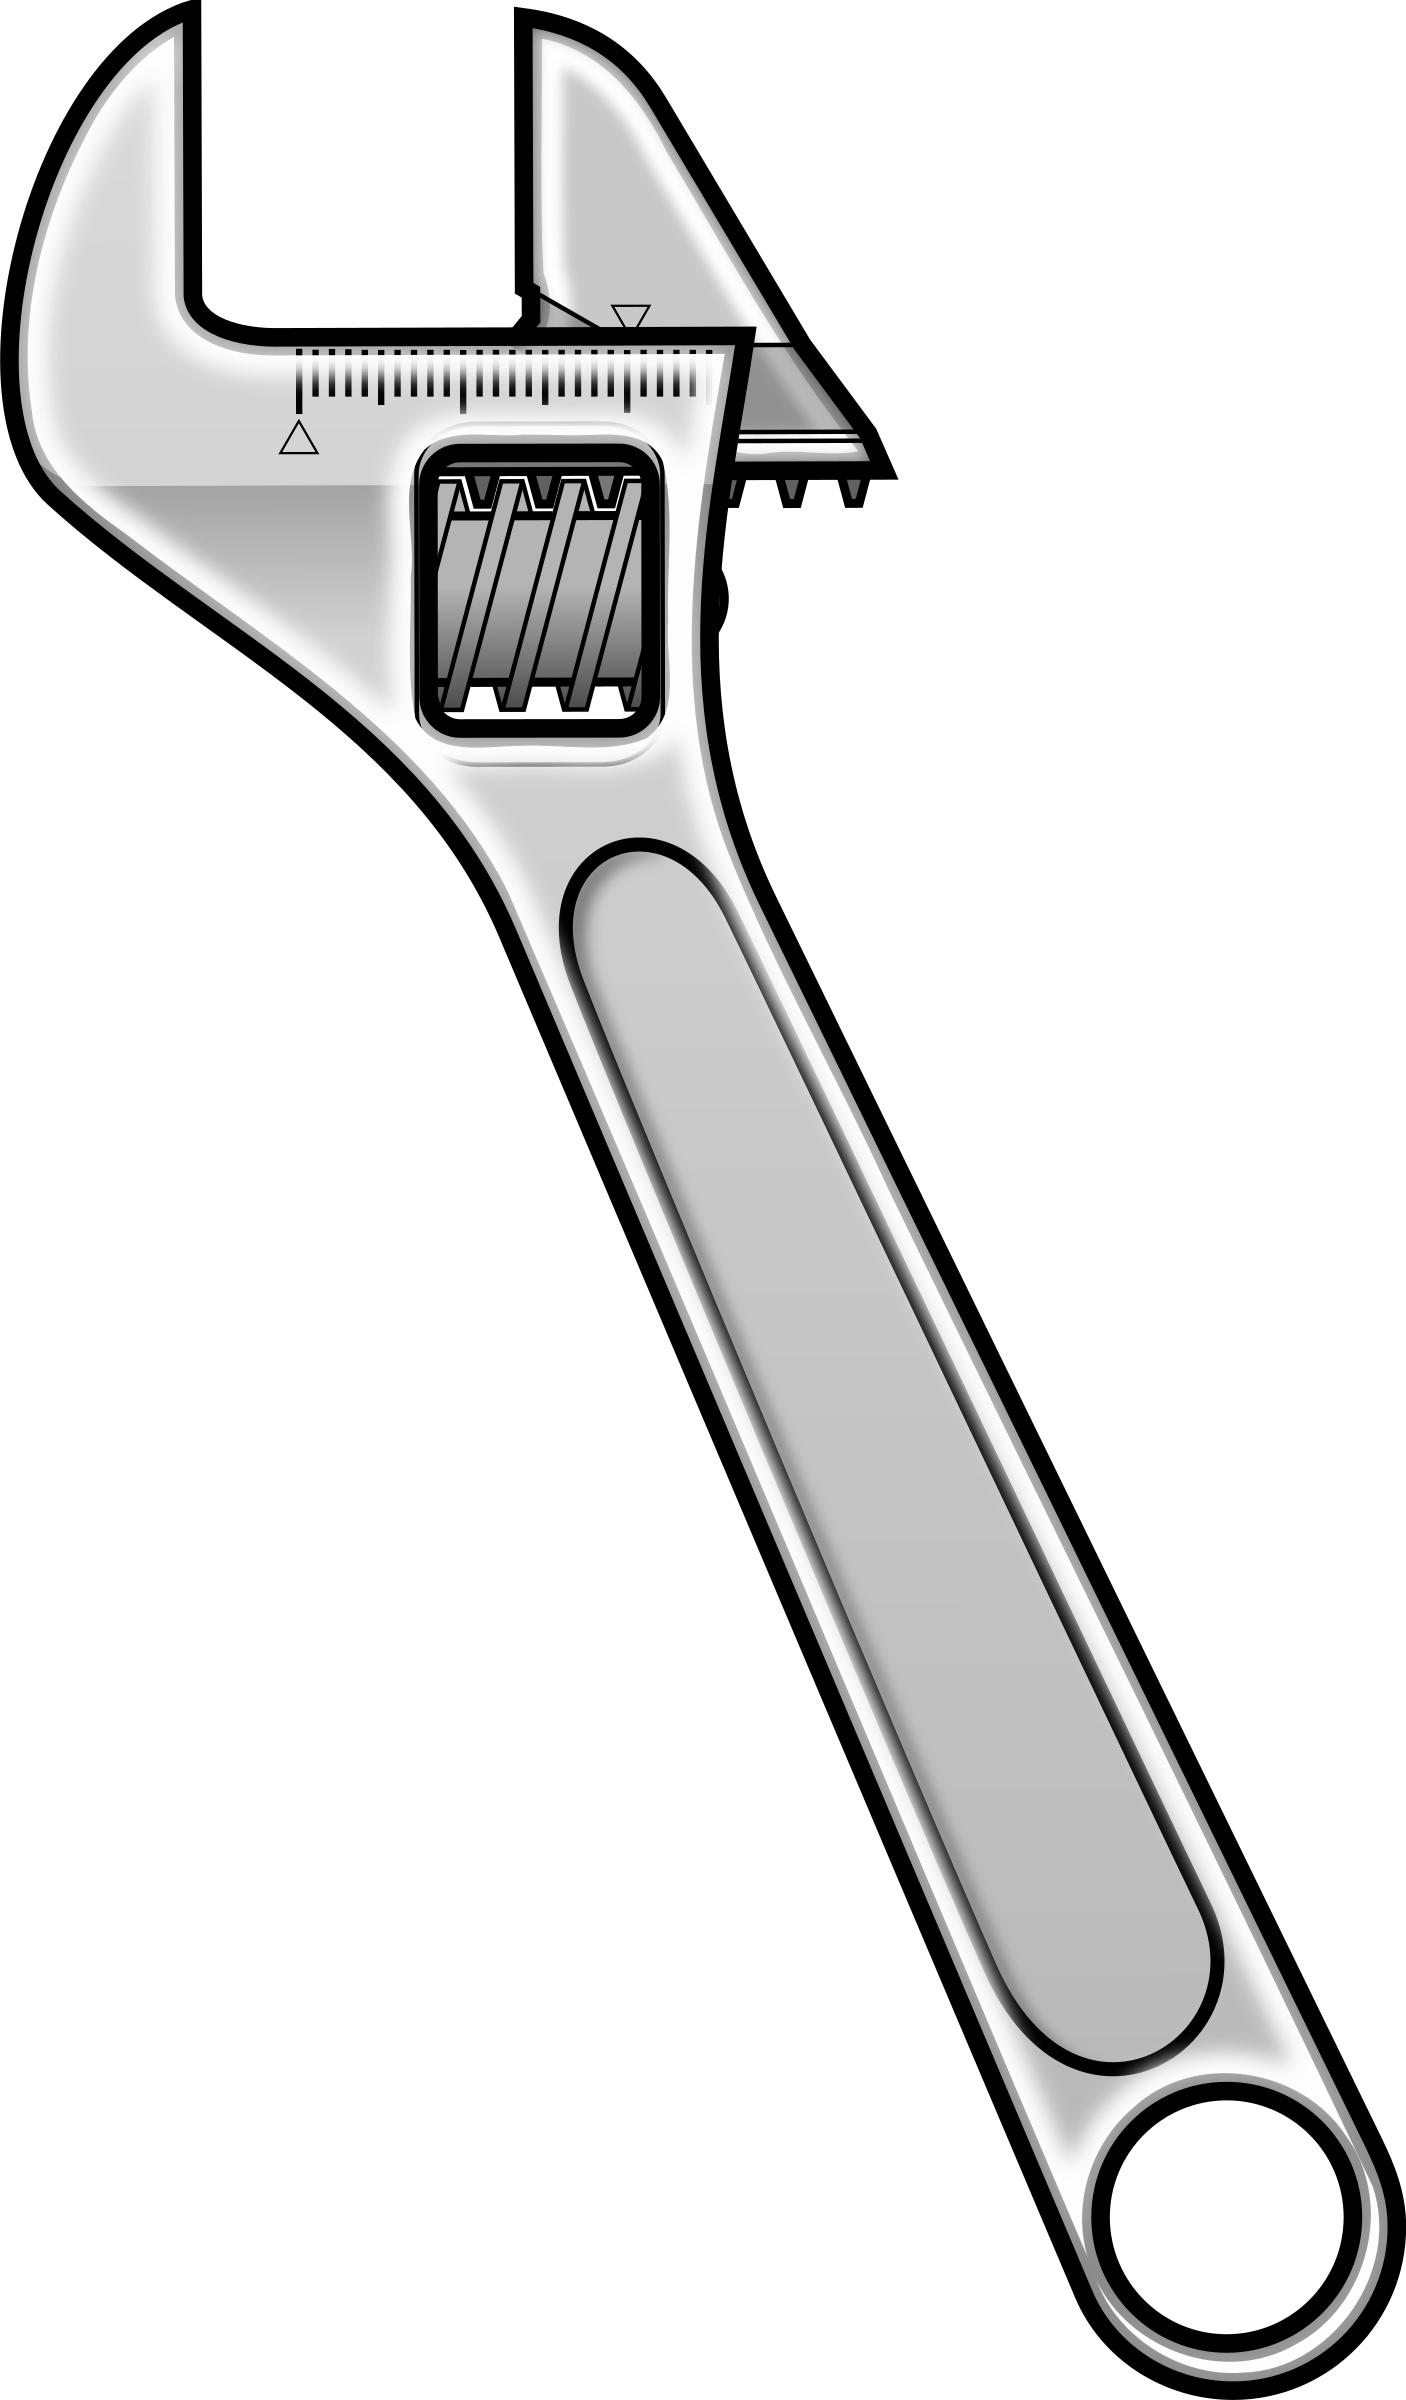 Adjustable wrench - icon style png